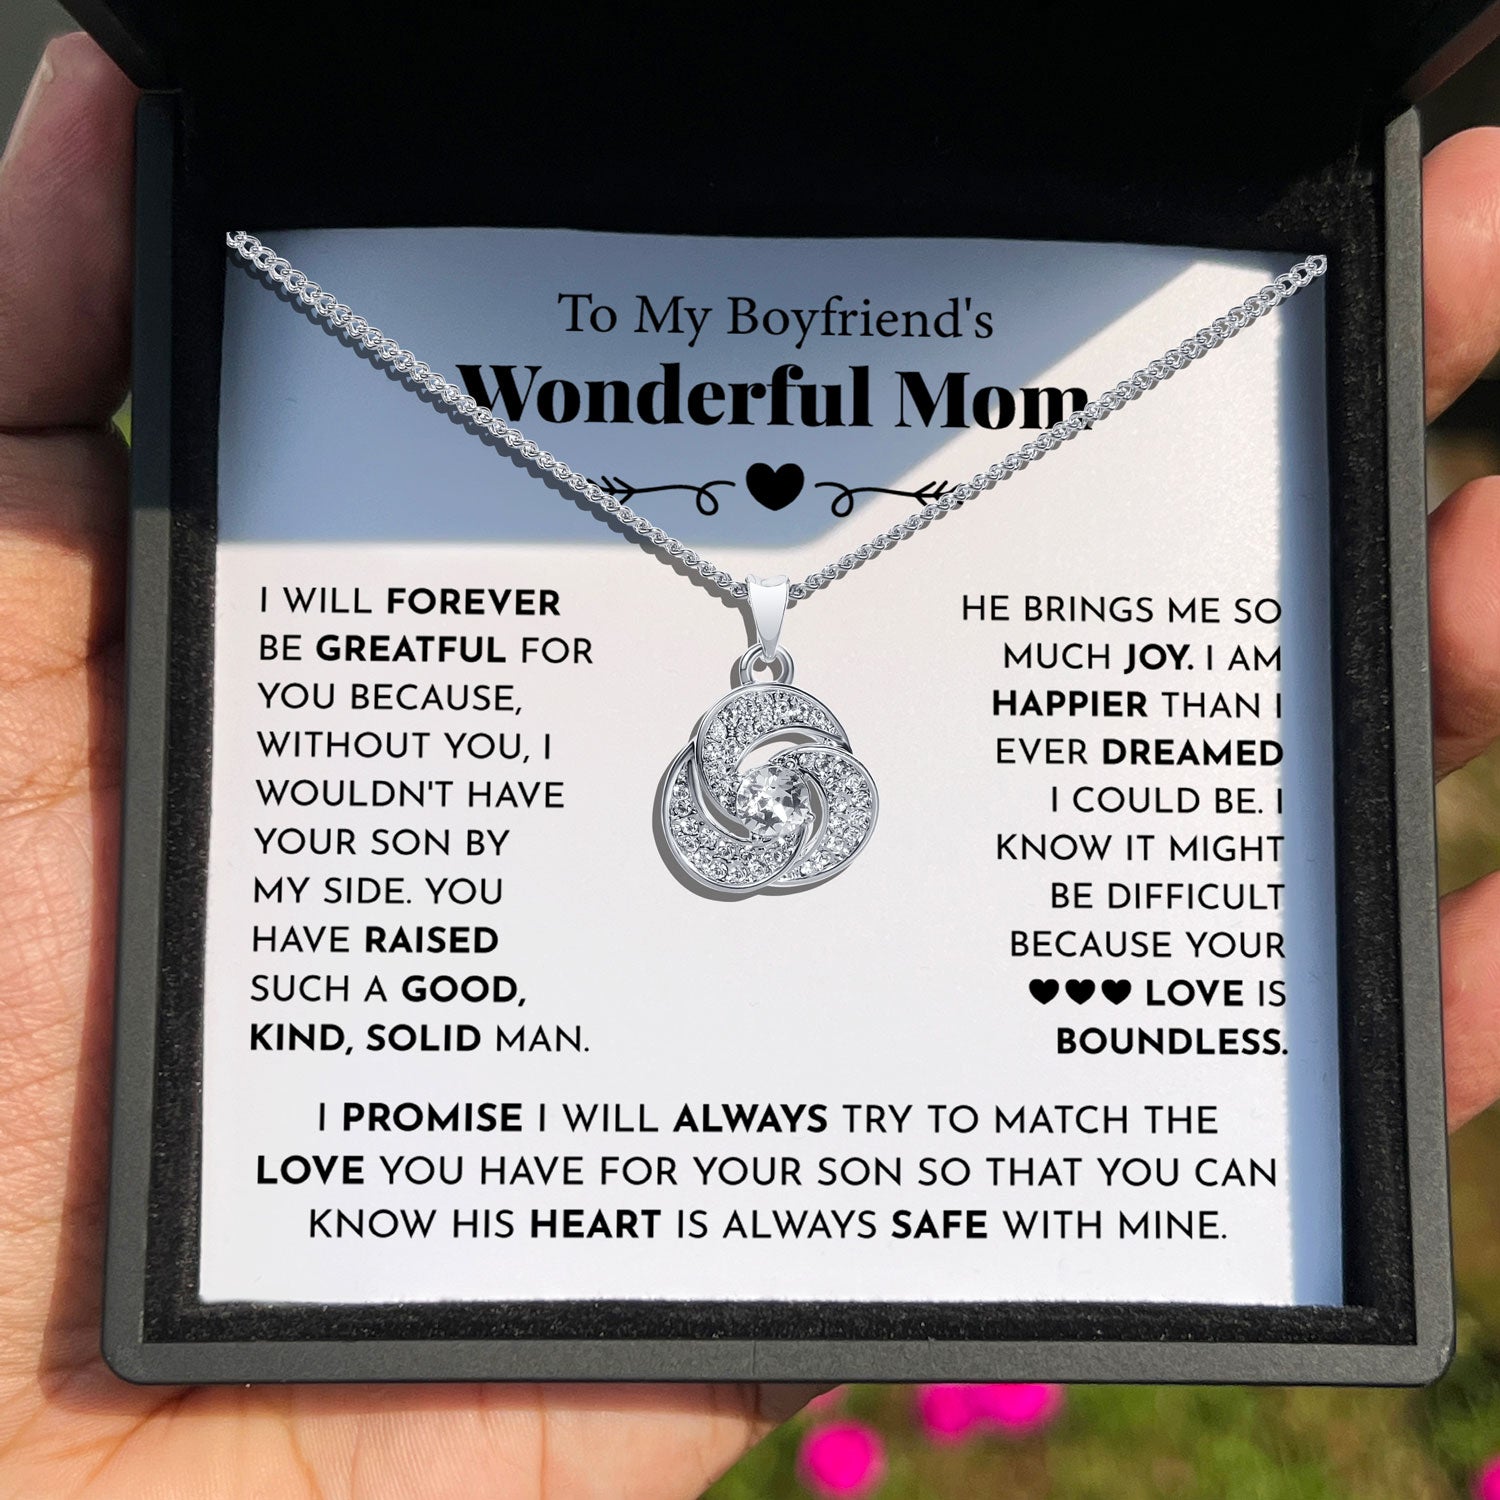 To My Boyfriend's Wonderful Mom - I Will Forever Be Grateful For You - Tryndi Love Knot Necklace